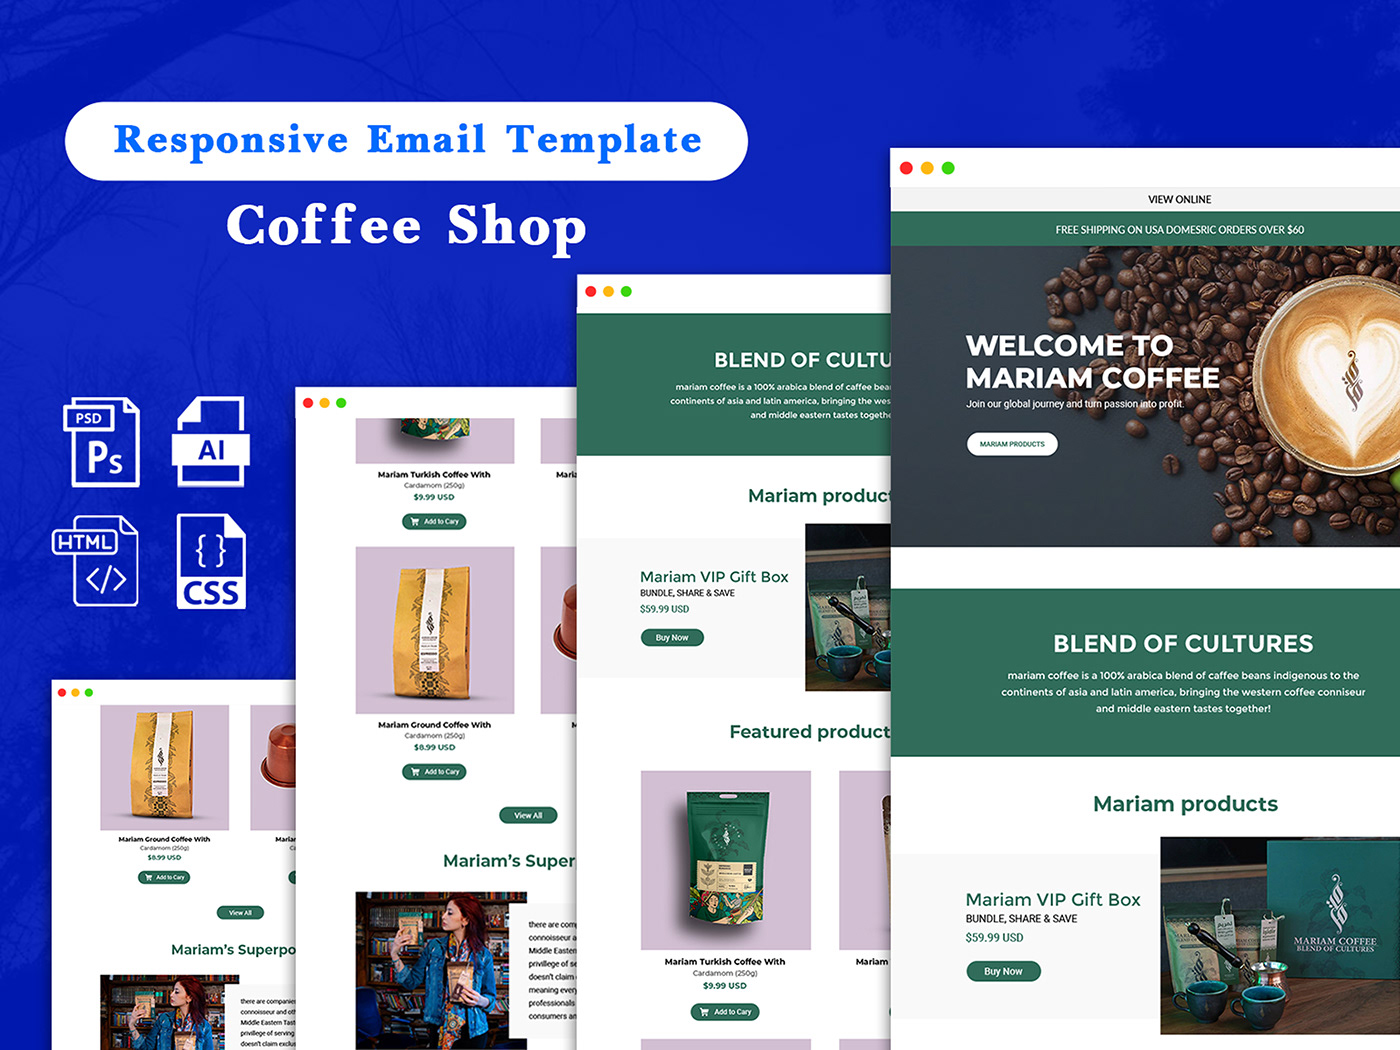 Coffee Shop Email Template Design & Develop